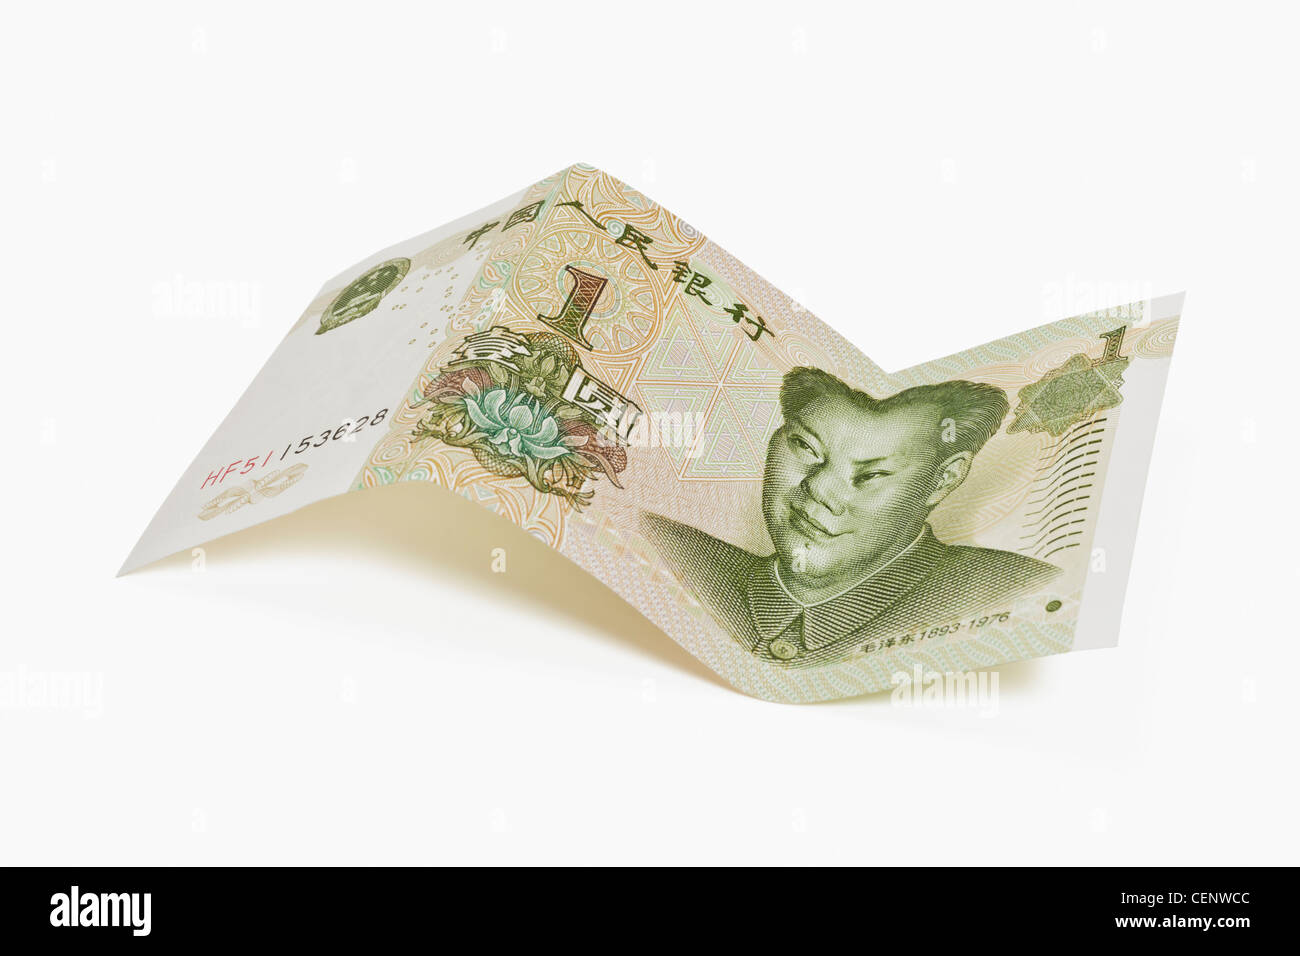 1 yuan bill with the portrait of Mao Zedong. The renminbi, the Chinese currency, was introduced in 1949. Stock Photo